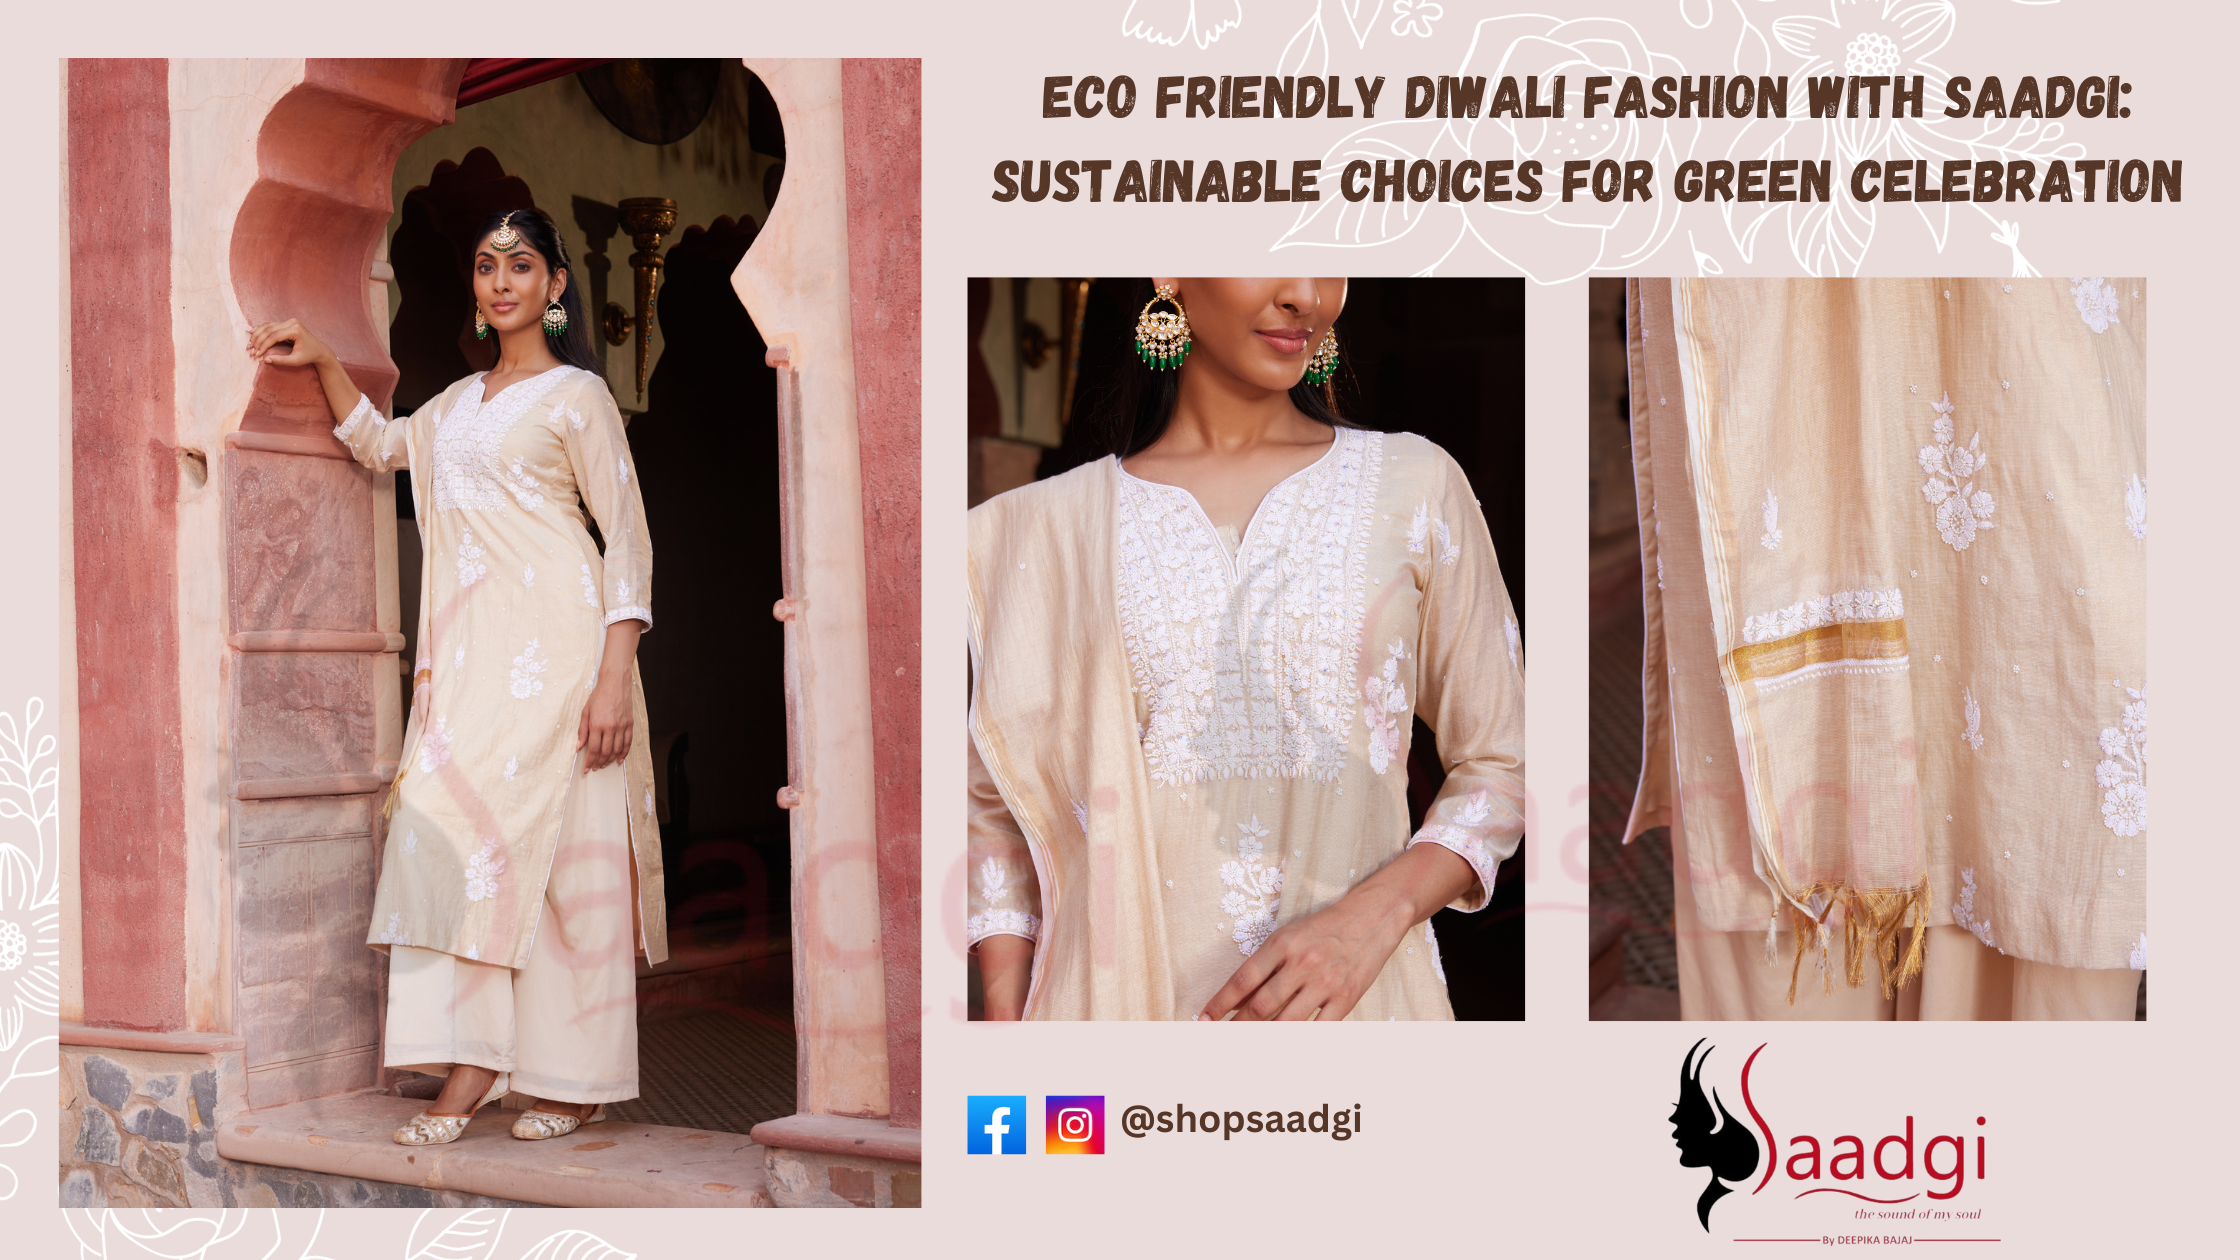 Eco friendly Diwali Fashion with Saadgi: Sustainable choices for green celebration